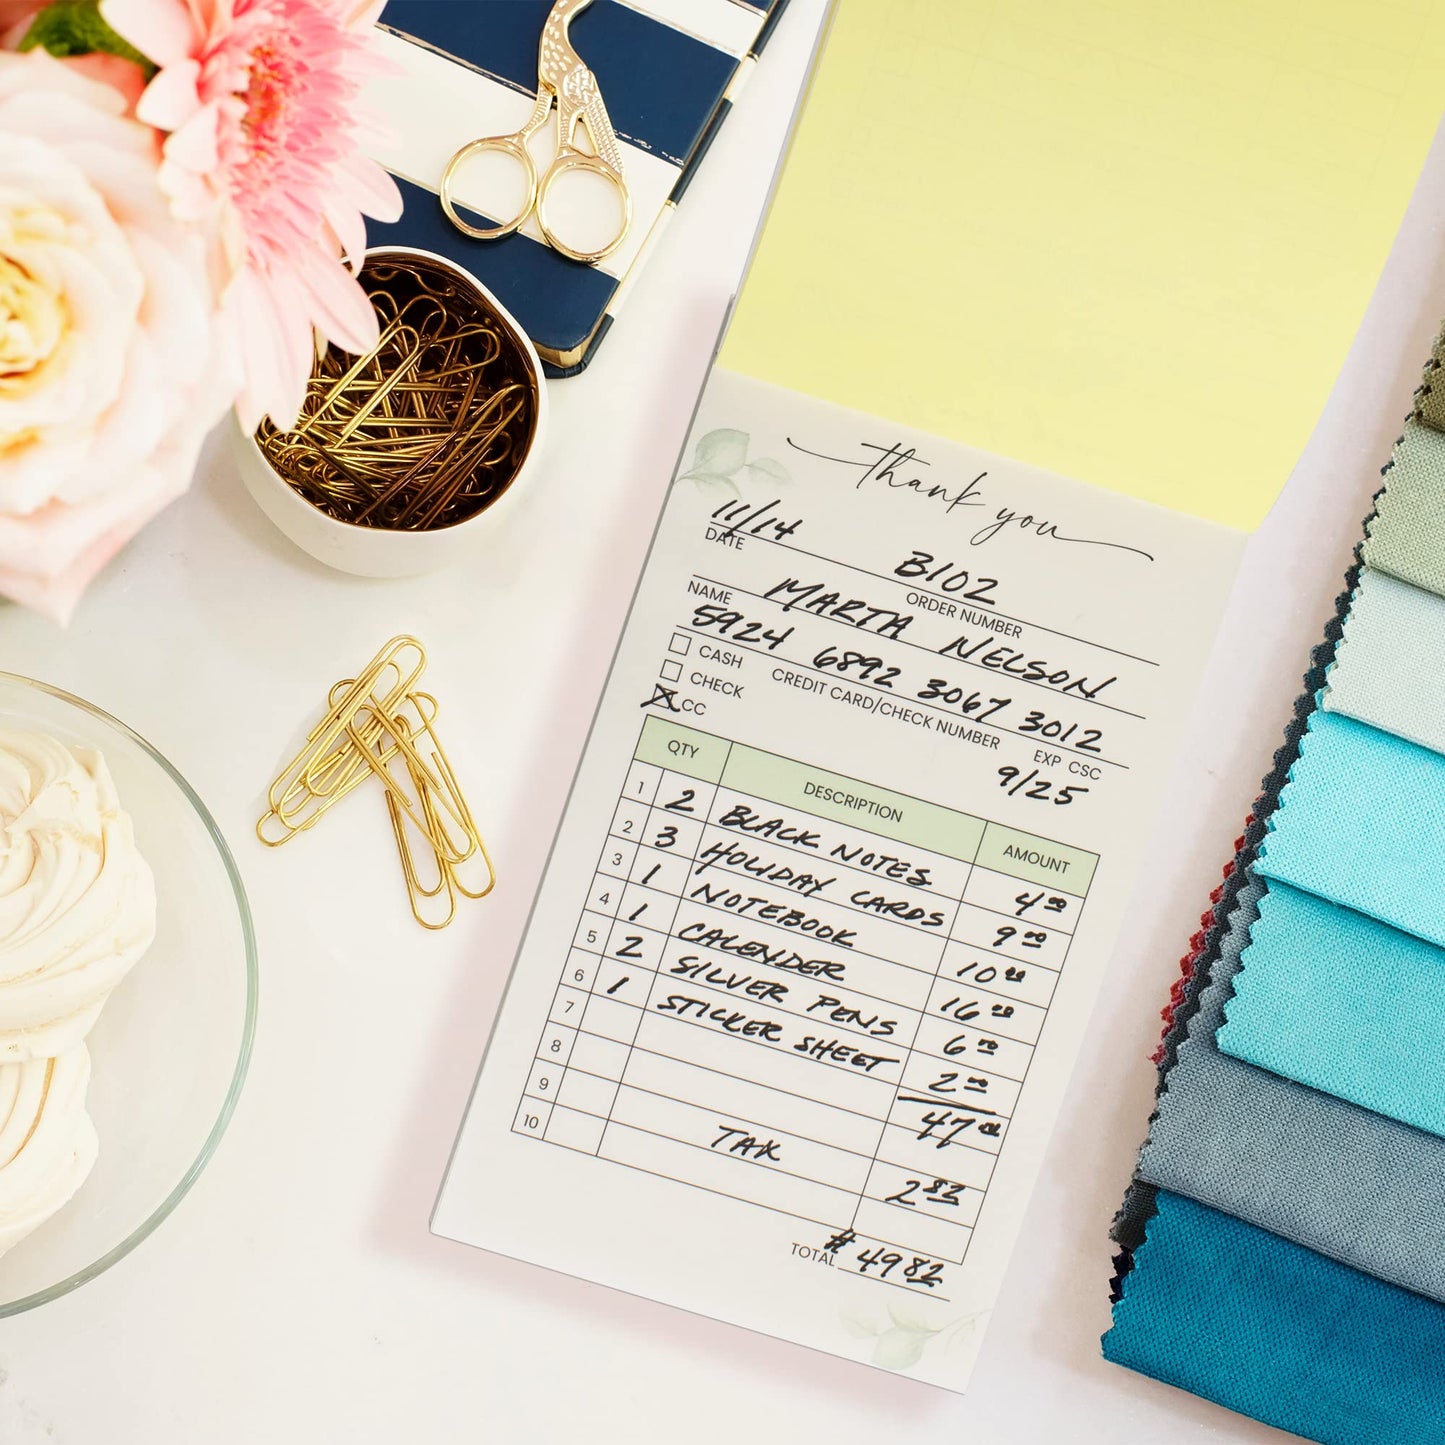 Simplified Thank You Receipt Book for Small Businesses - Aesthetic and Easy to Use Receipt Pad - The Perfect Business Supplies That Helps You and your Happy Clients to Stay Organized